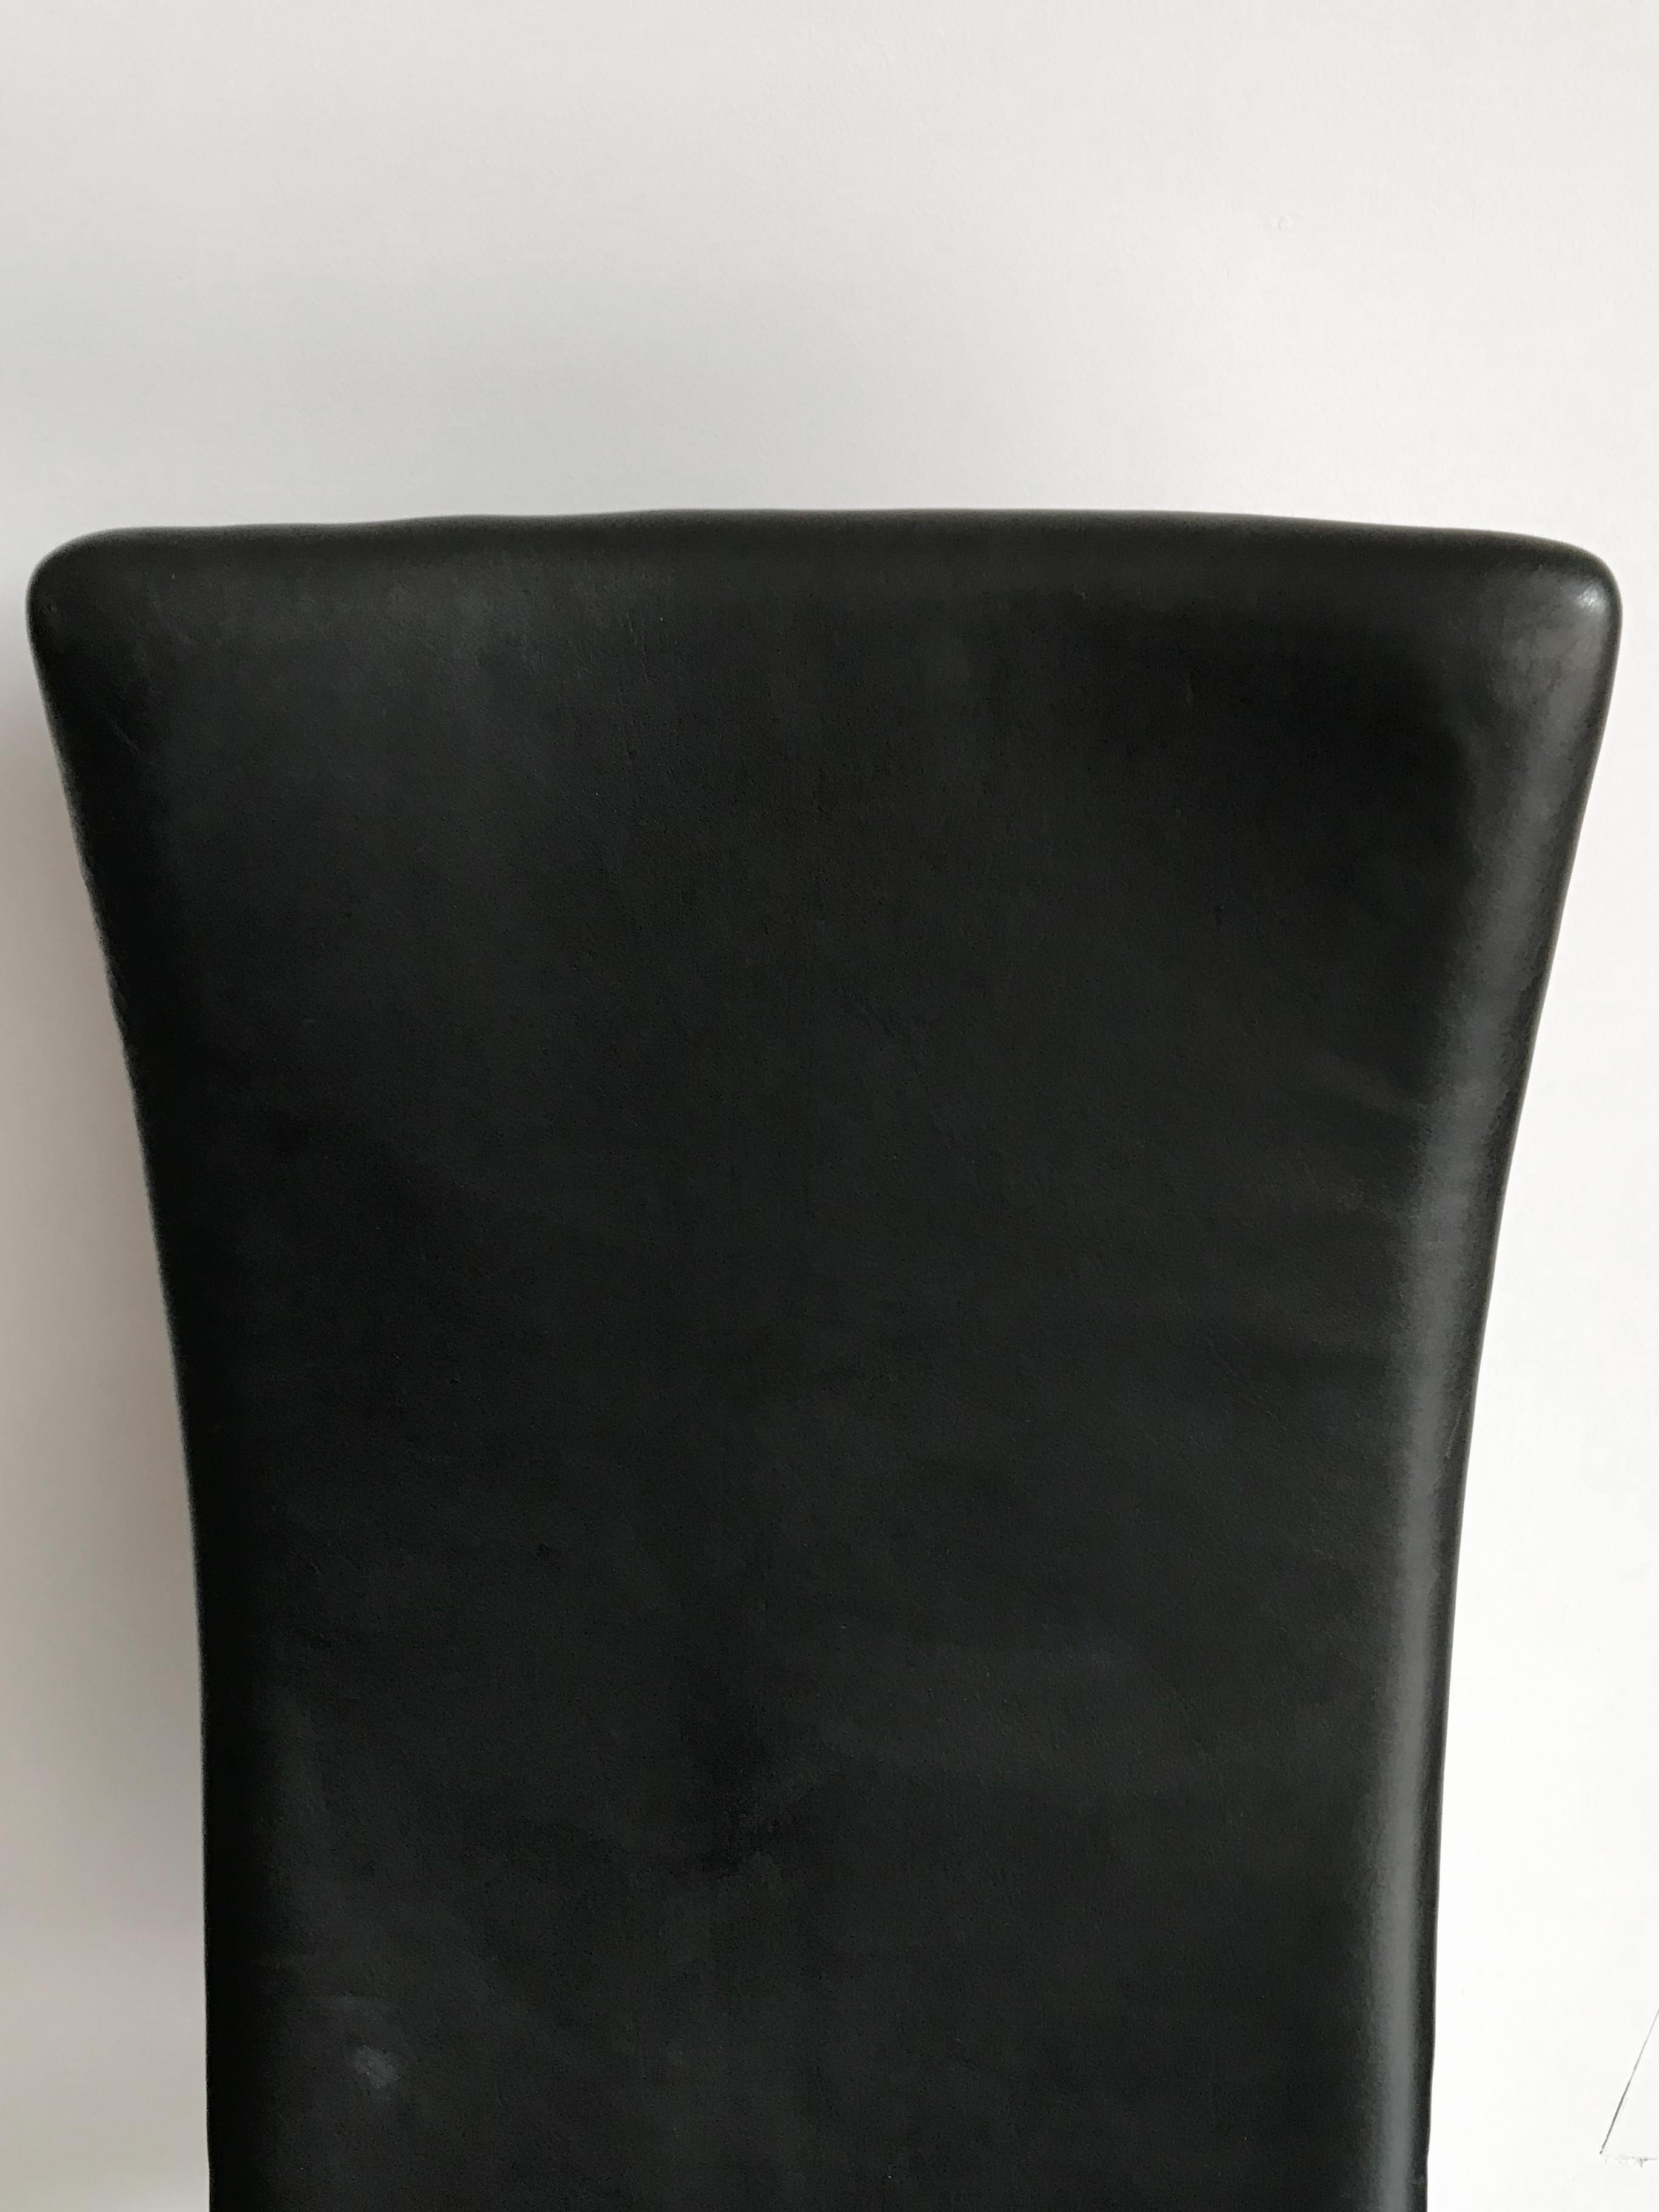 Oxford Midcentury Black Leather Chairs by Arne Jacobsen for Fritz Hansen, 1960s For Sale 6